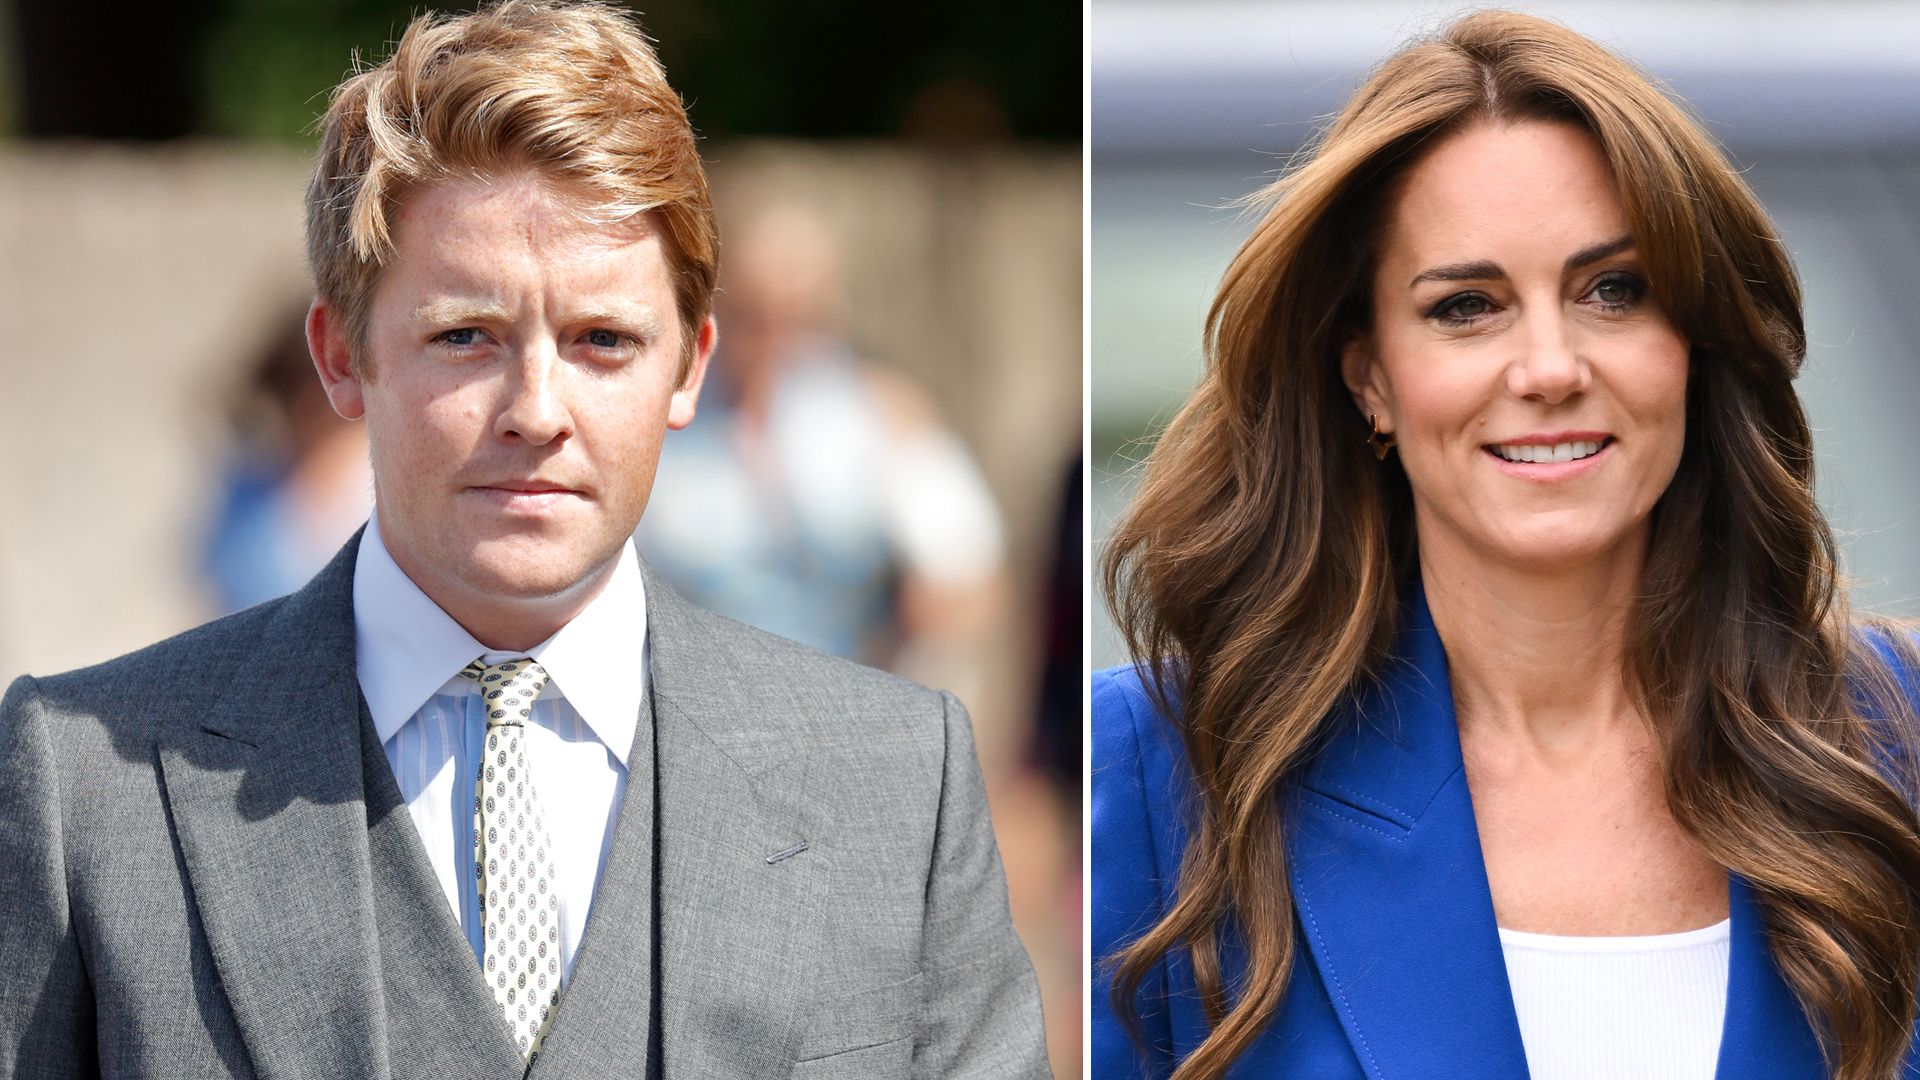 Hugh Grosvenor in a grey suit and Kate Middleton in a blue blazer